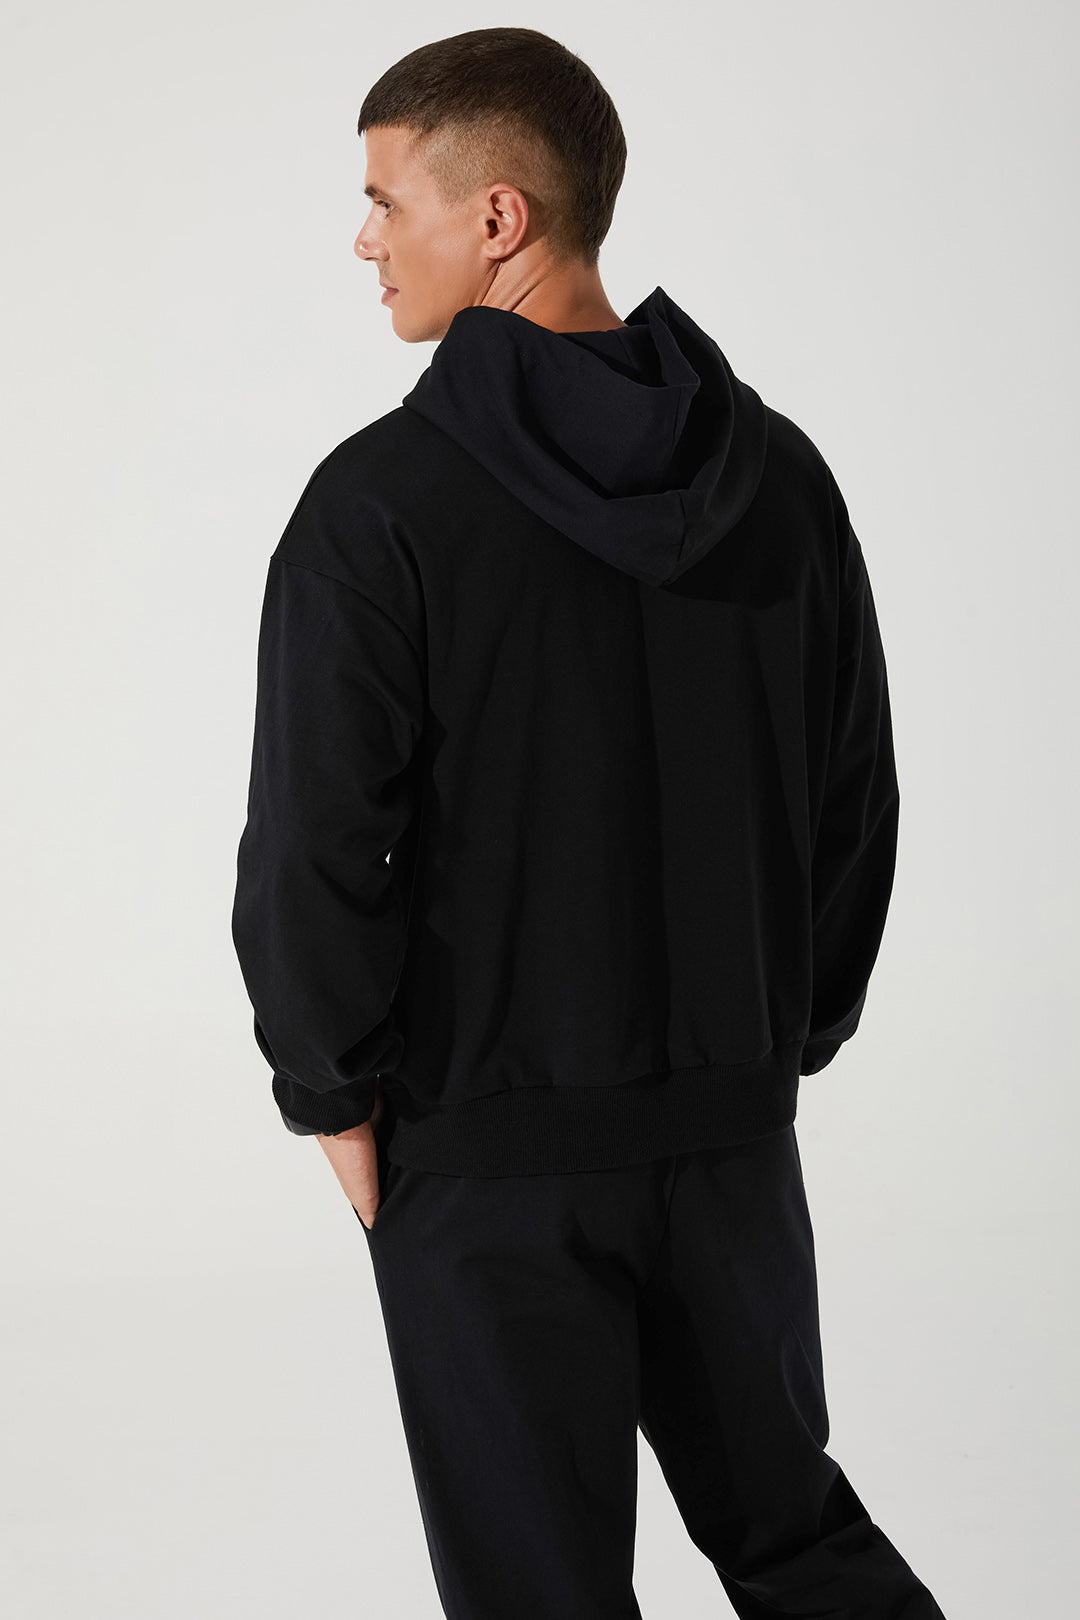 Black men's hoodie with cropped top design, style OW-0033-MHO-BK, available in size 3.